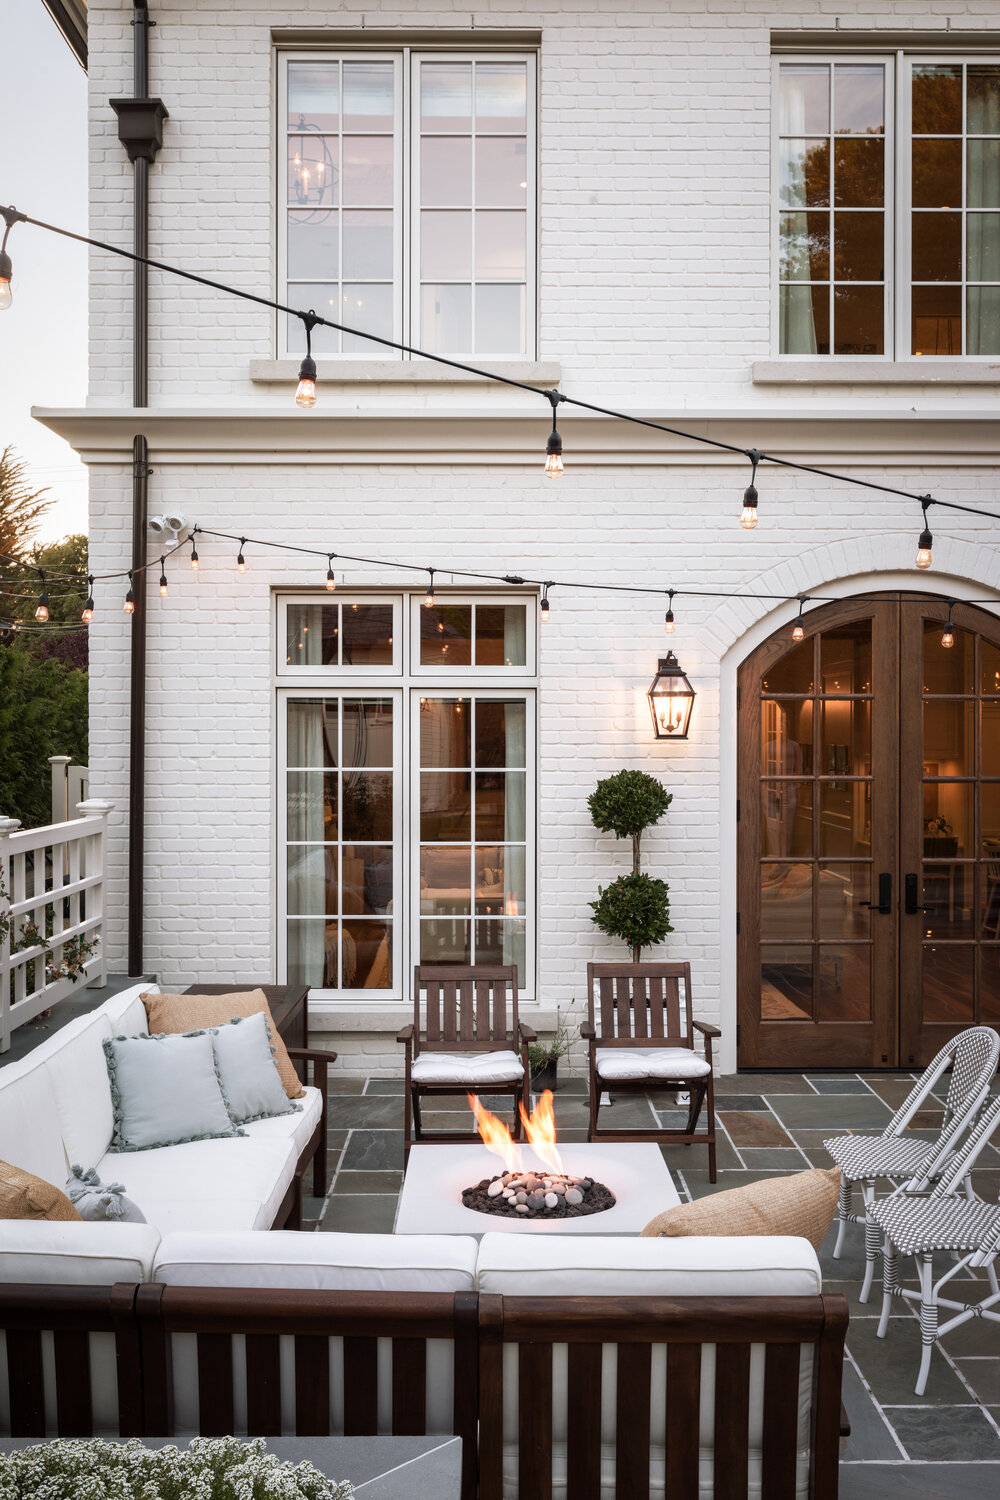 Patio at beautiful French country home with interior design by Jenny Martin Design. #frenchcountryhome #interiordesign